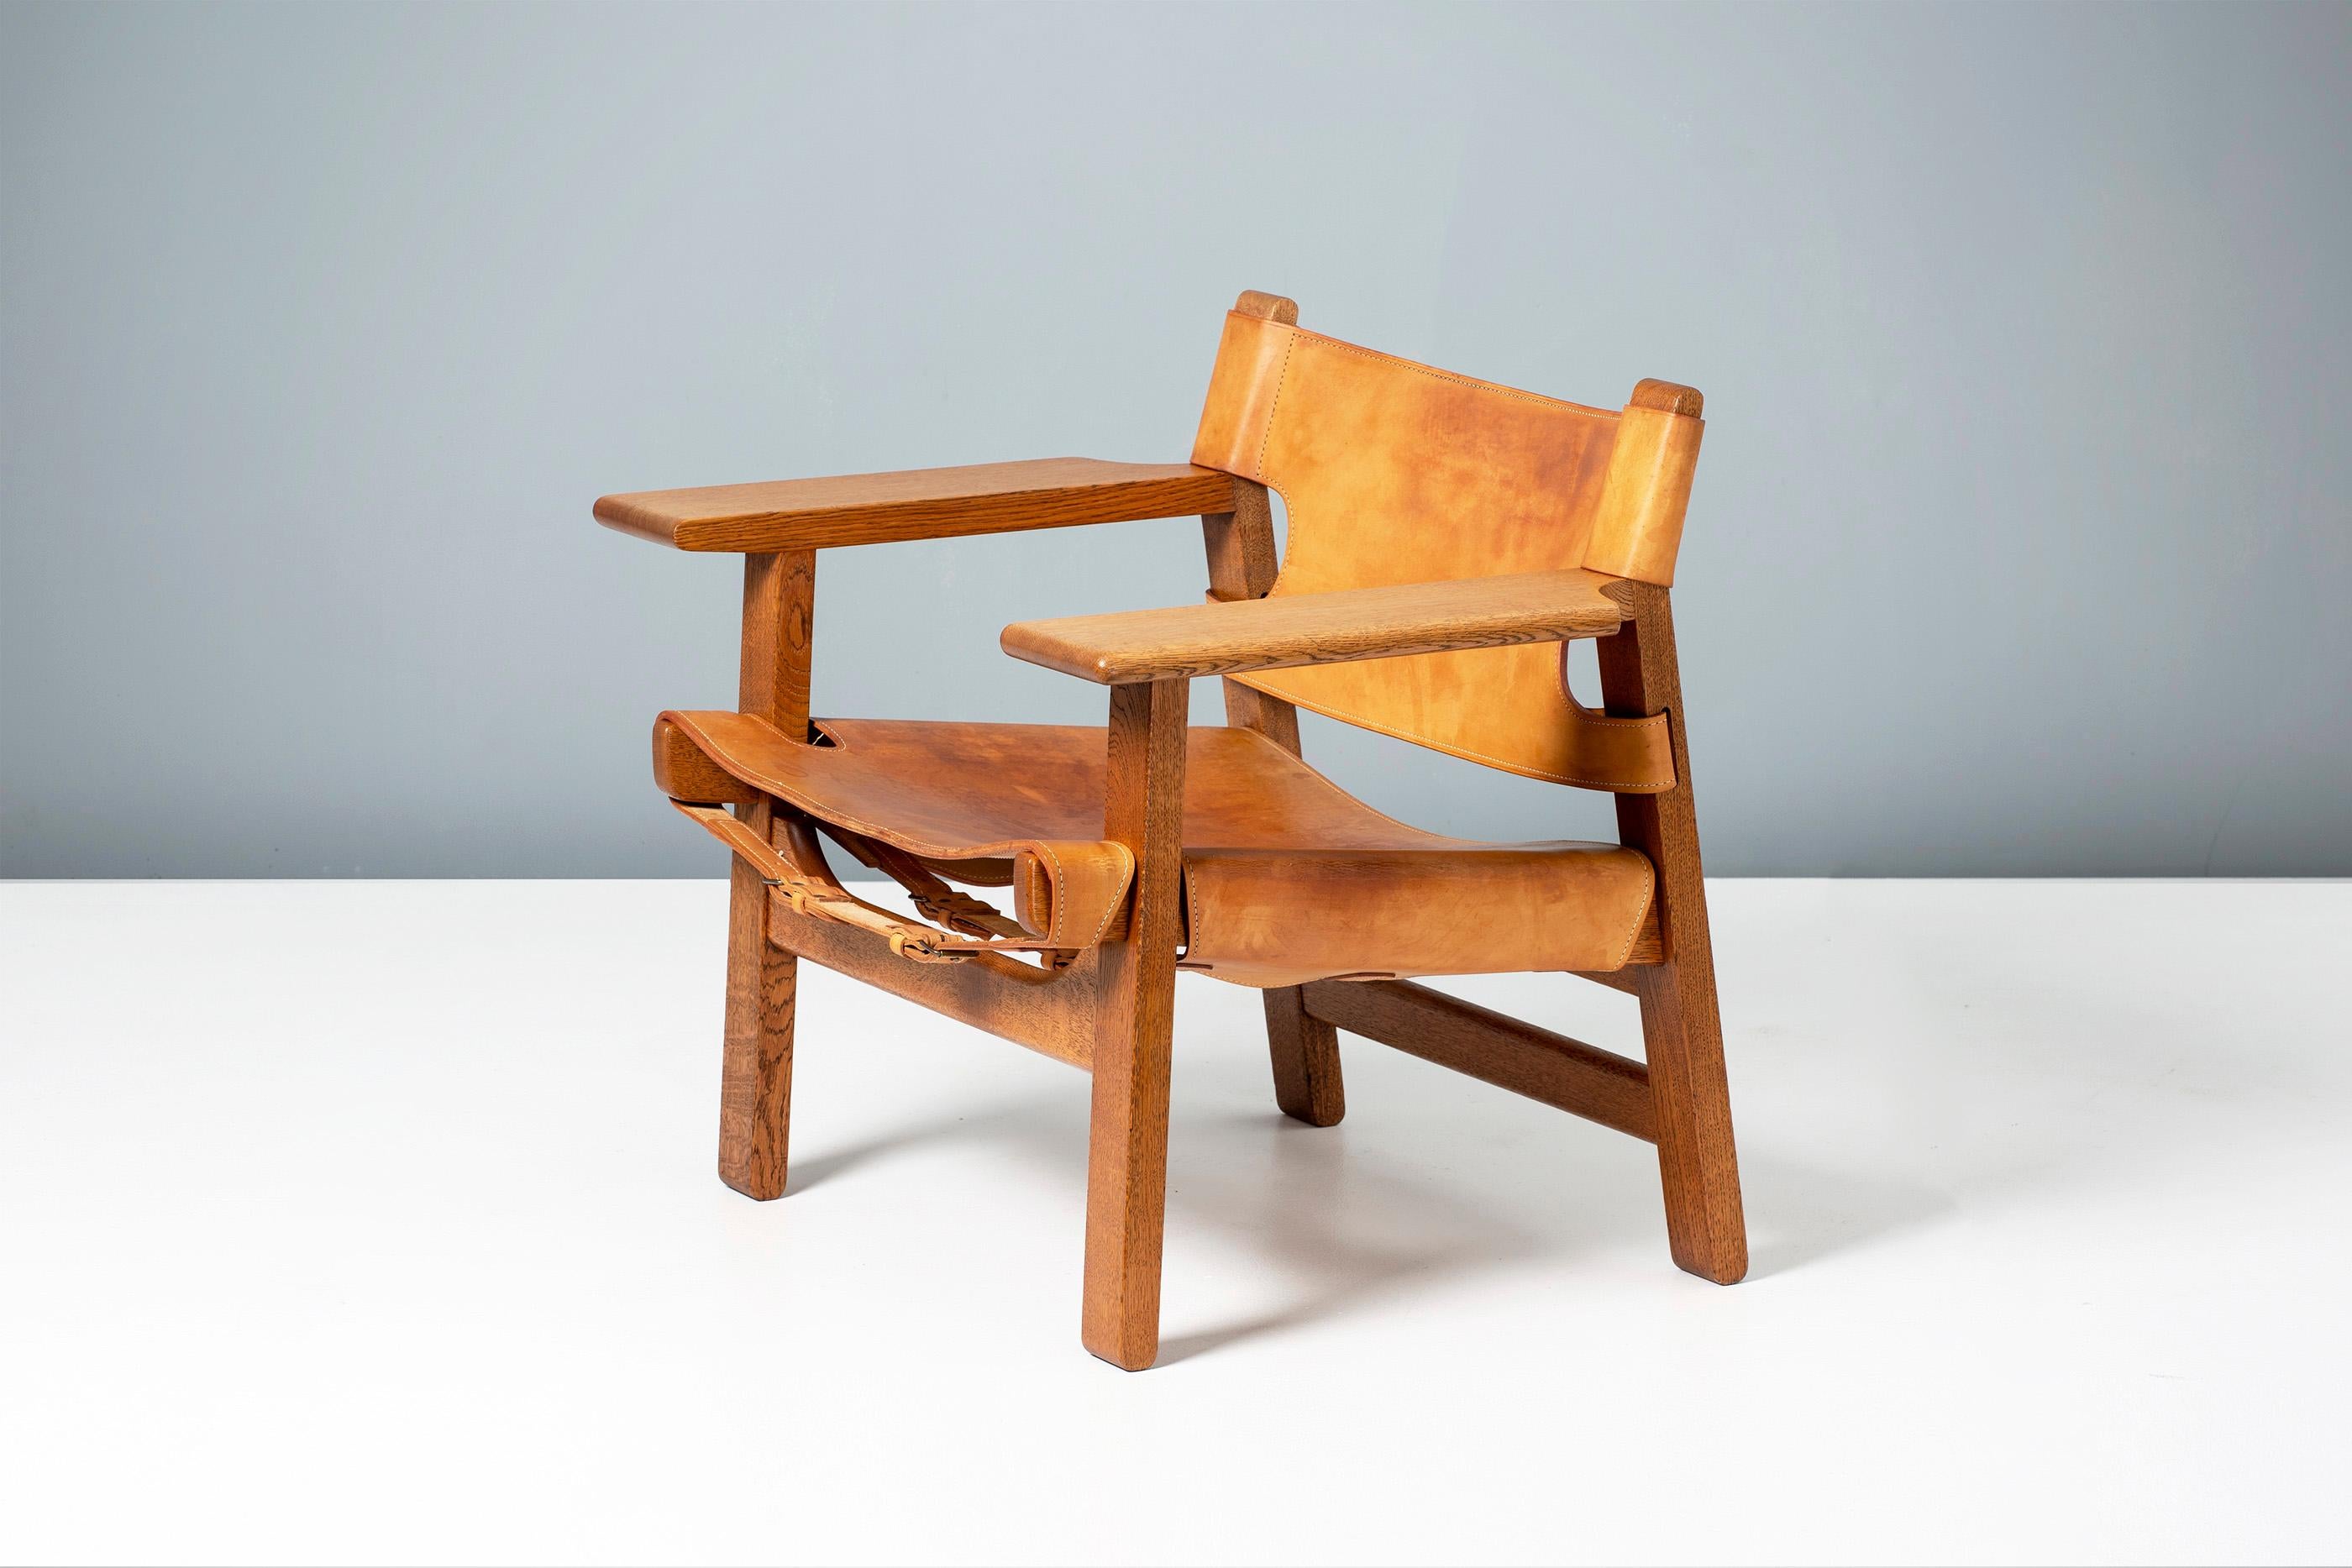 Børge Mogensen

The Spanish Chair, circa 1958

Manufactured by Fredericia Stolefabrik, Copenhagen, Denmark. Solid oak frame with original, patinated tan saddle leather seat and back and brass fittings. This example produced in the 1960s. 

In